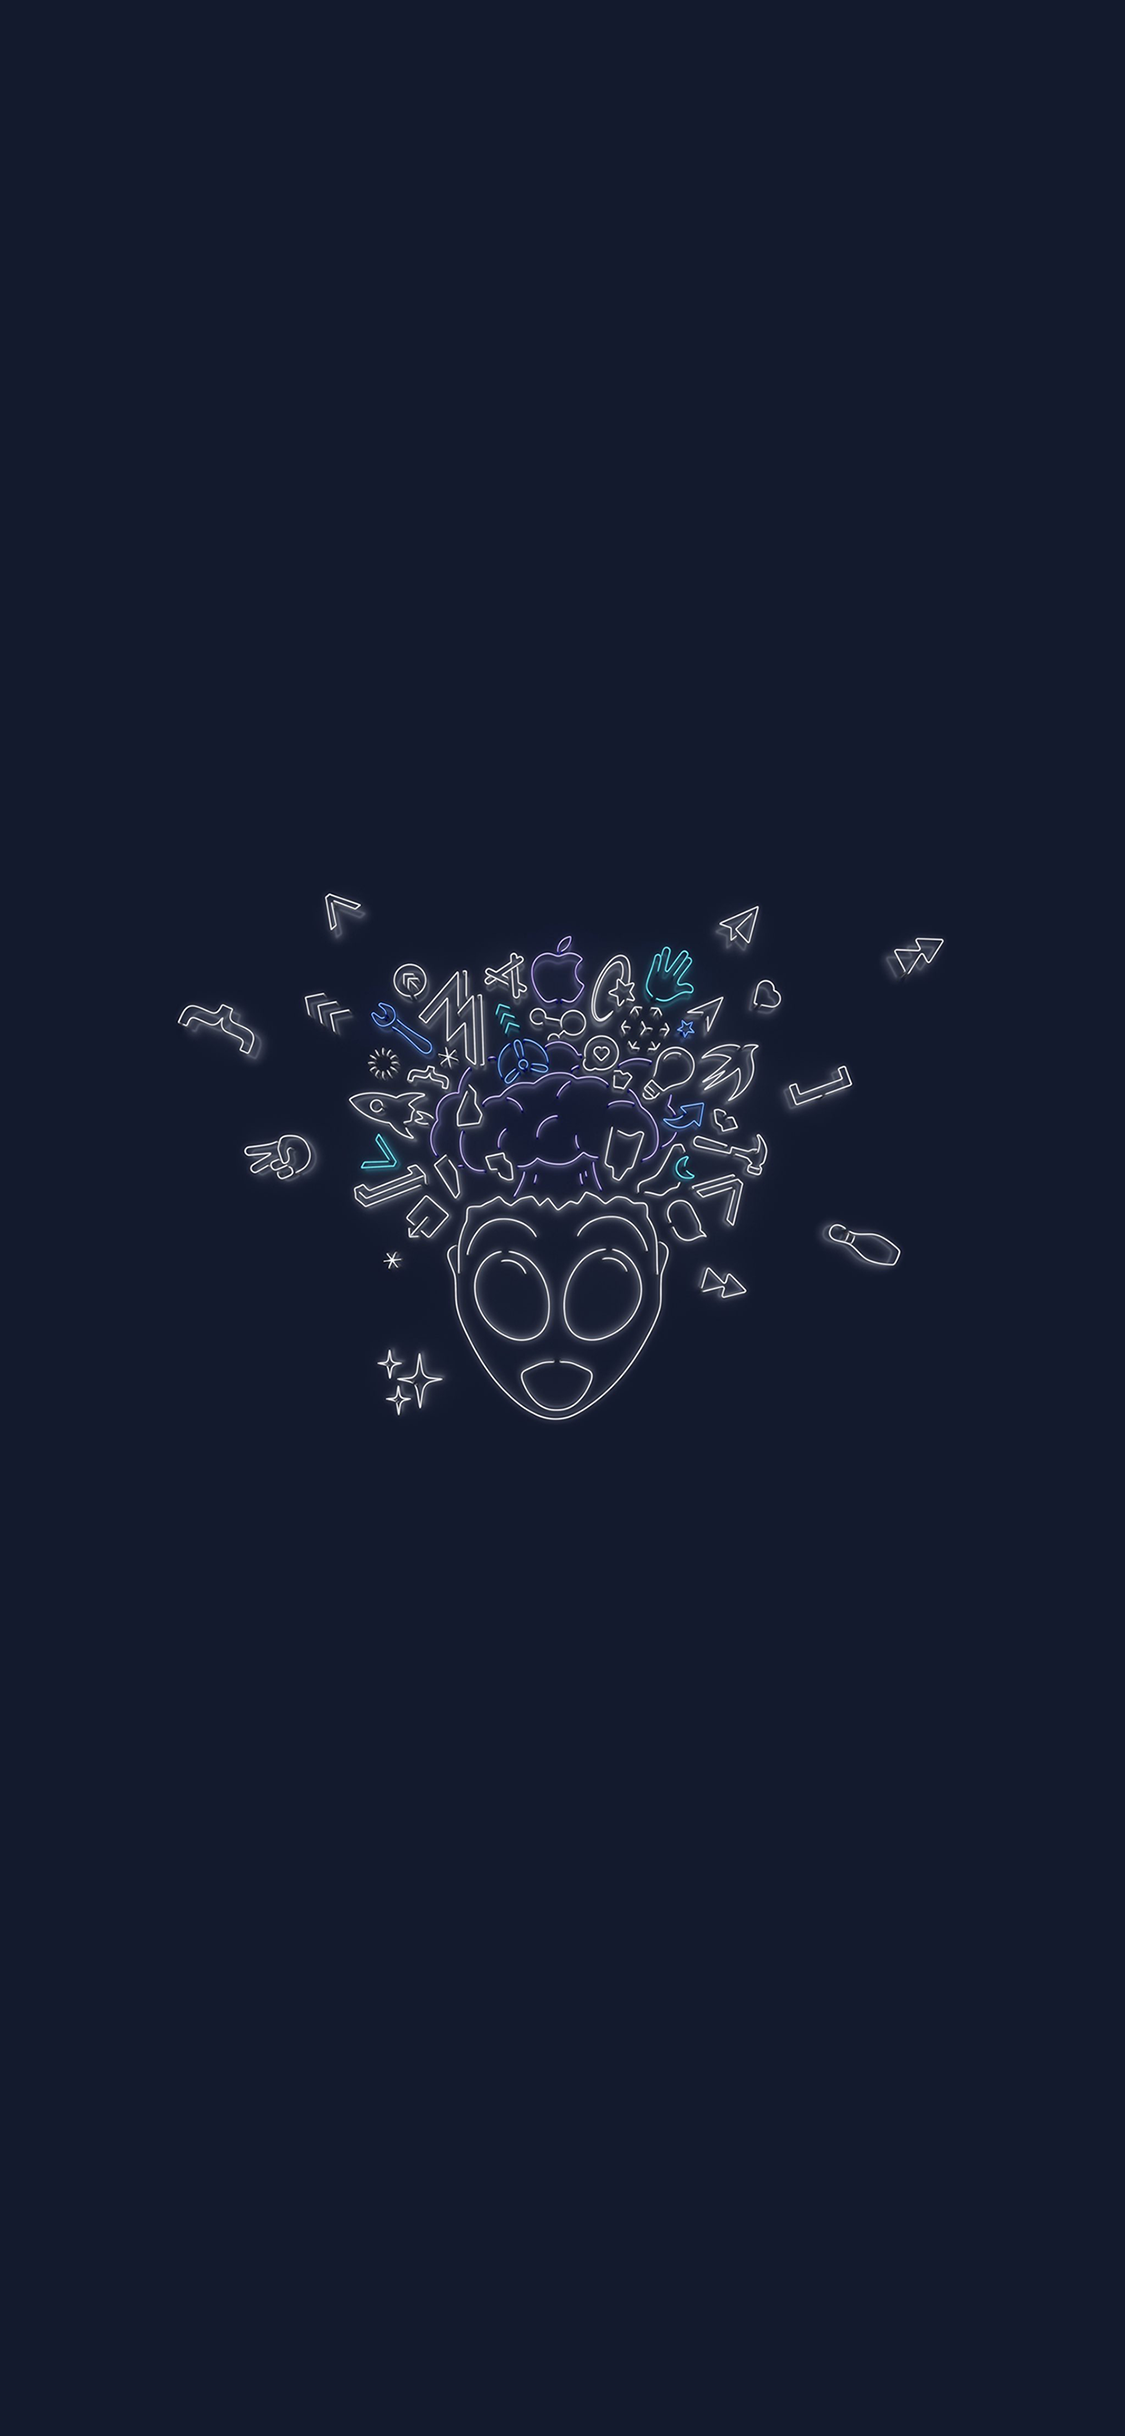 Download The WWDC 2019 Dark Mode Themed Wallpaper For iPhone, iPad